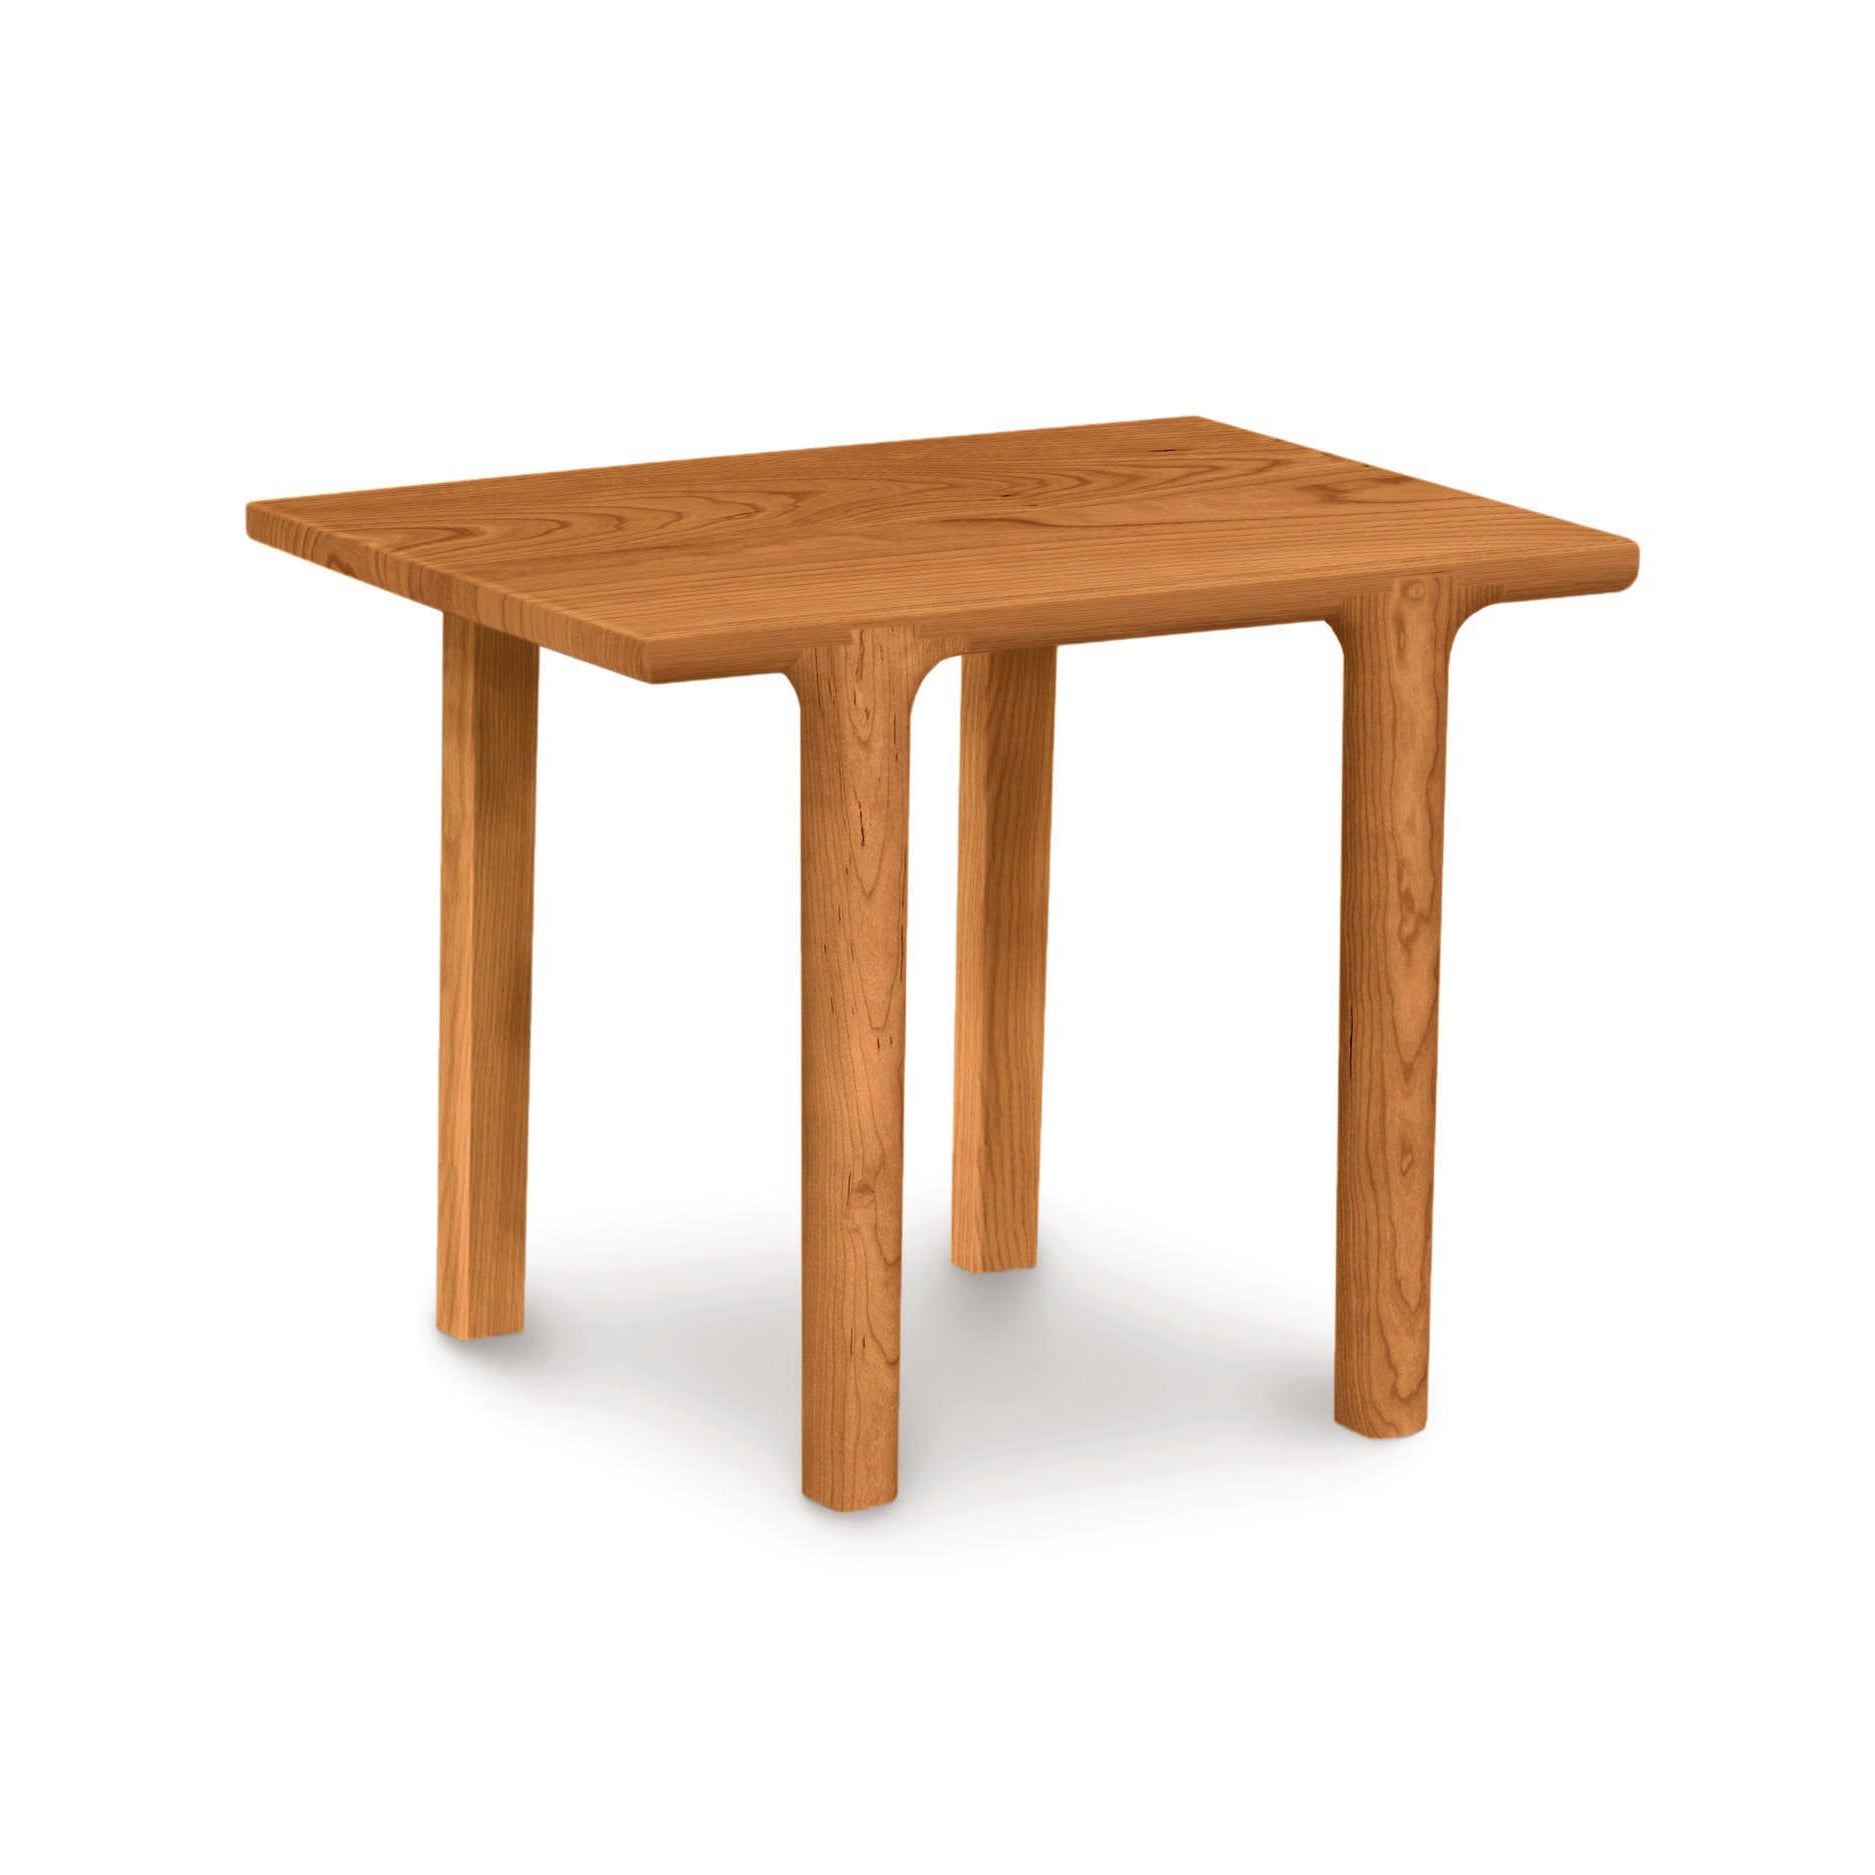 A modern wooden table with legs, specifically the Copeland Furniture Sierra Rectangular End Table.